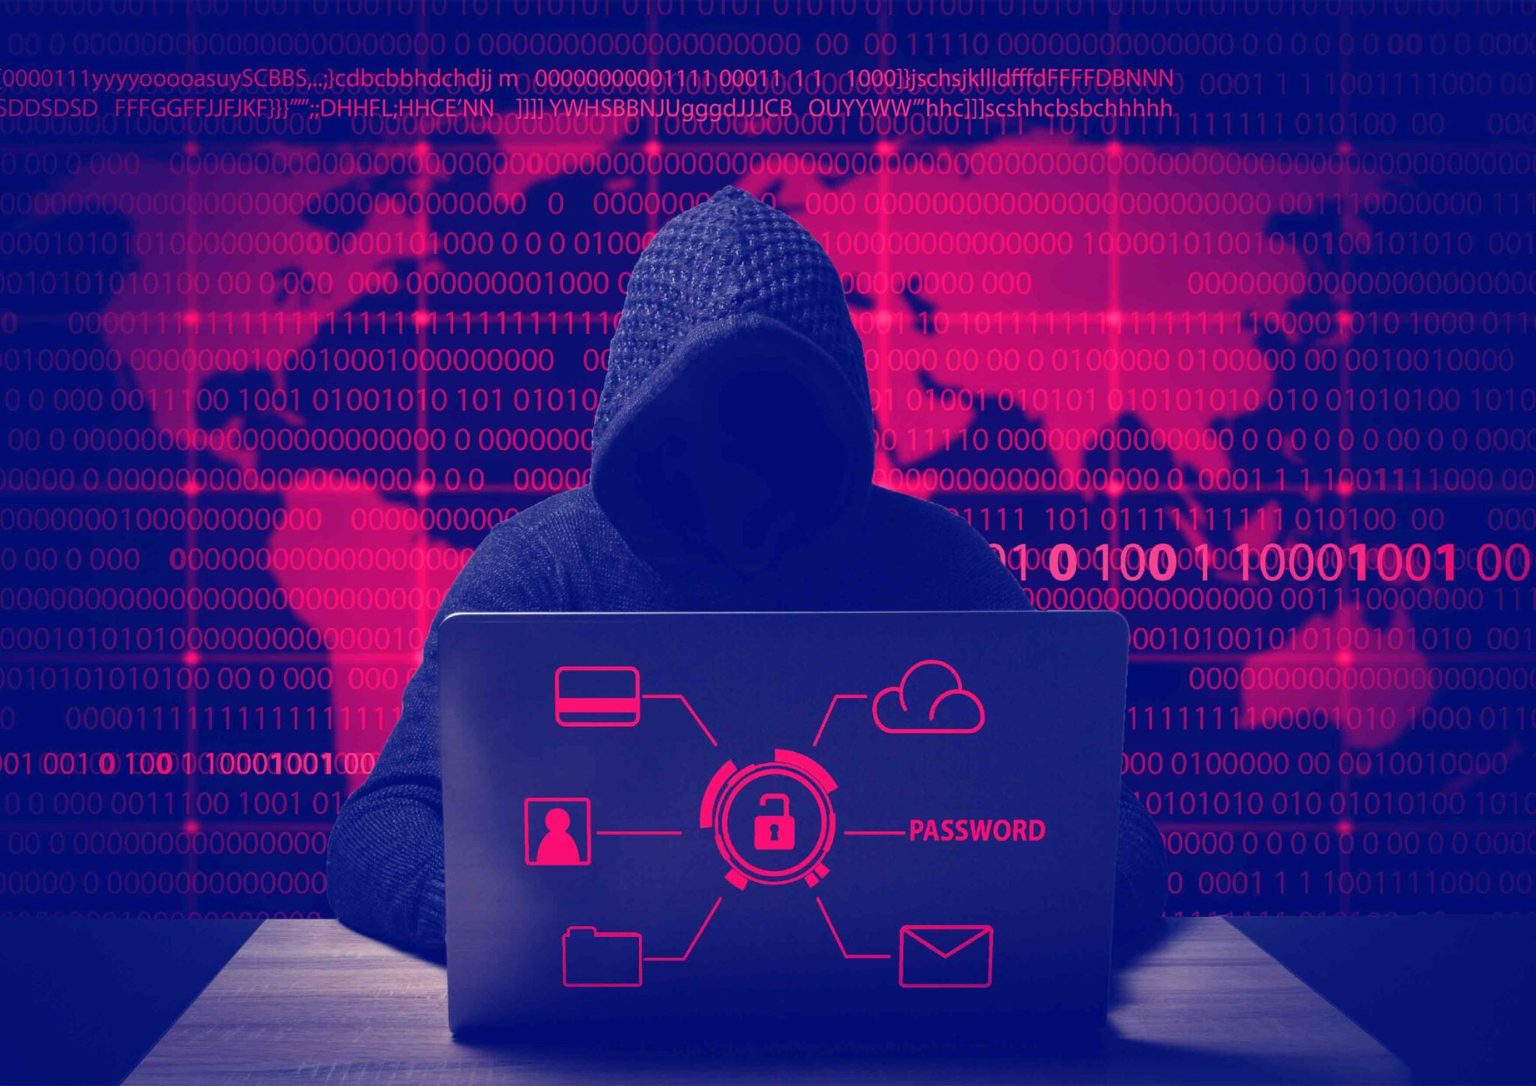 Best Cyber Security Courses and Services